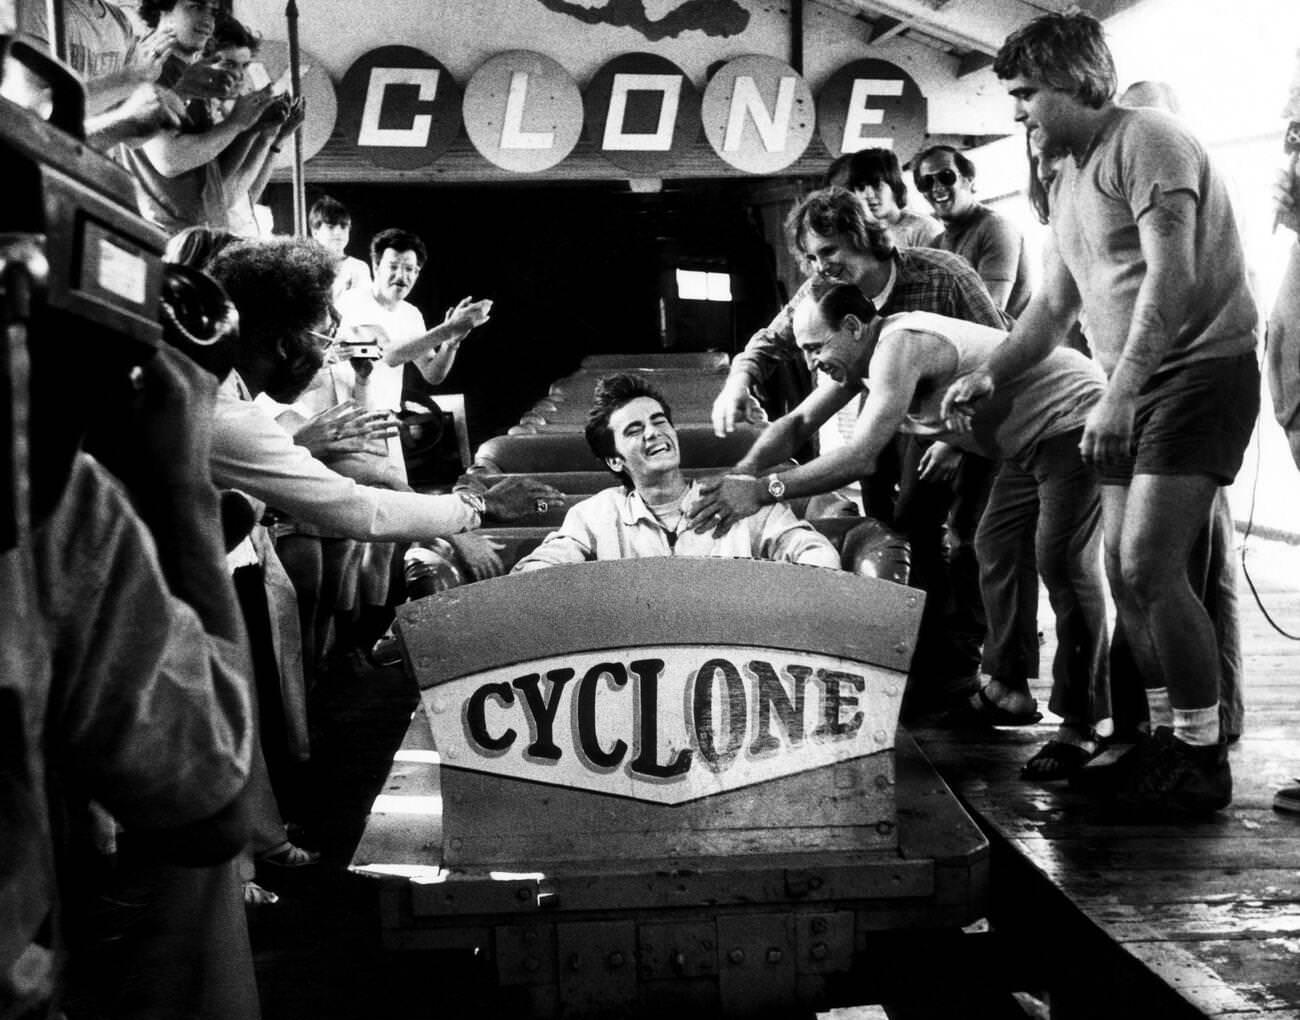 Michael Boodlay Celebrates His 1,000Th Ride On The Cyclone, Year Unspecified.